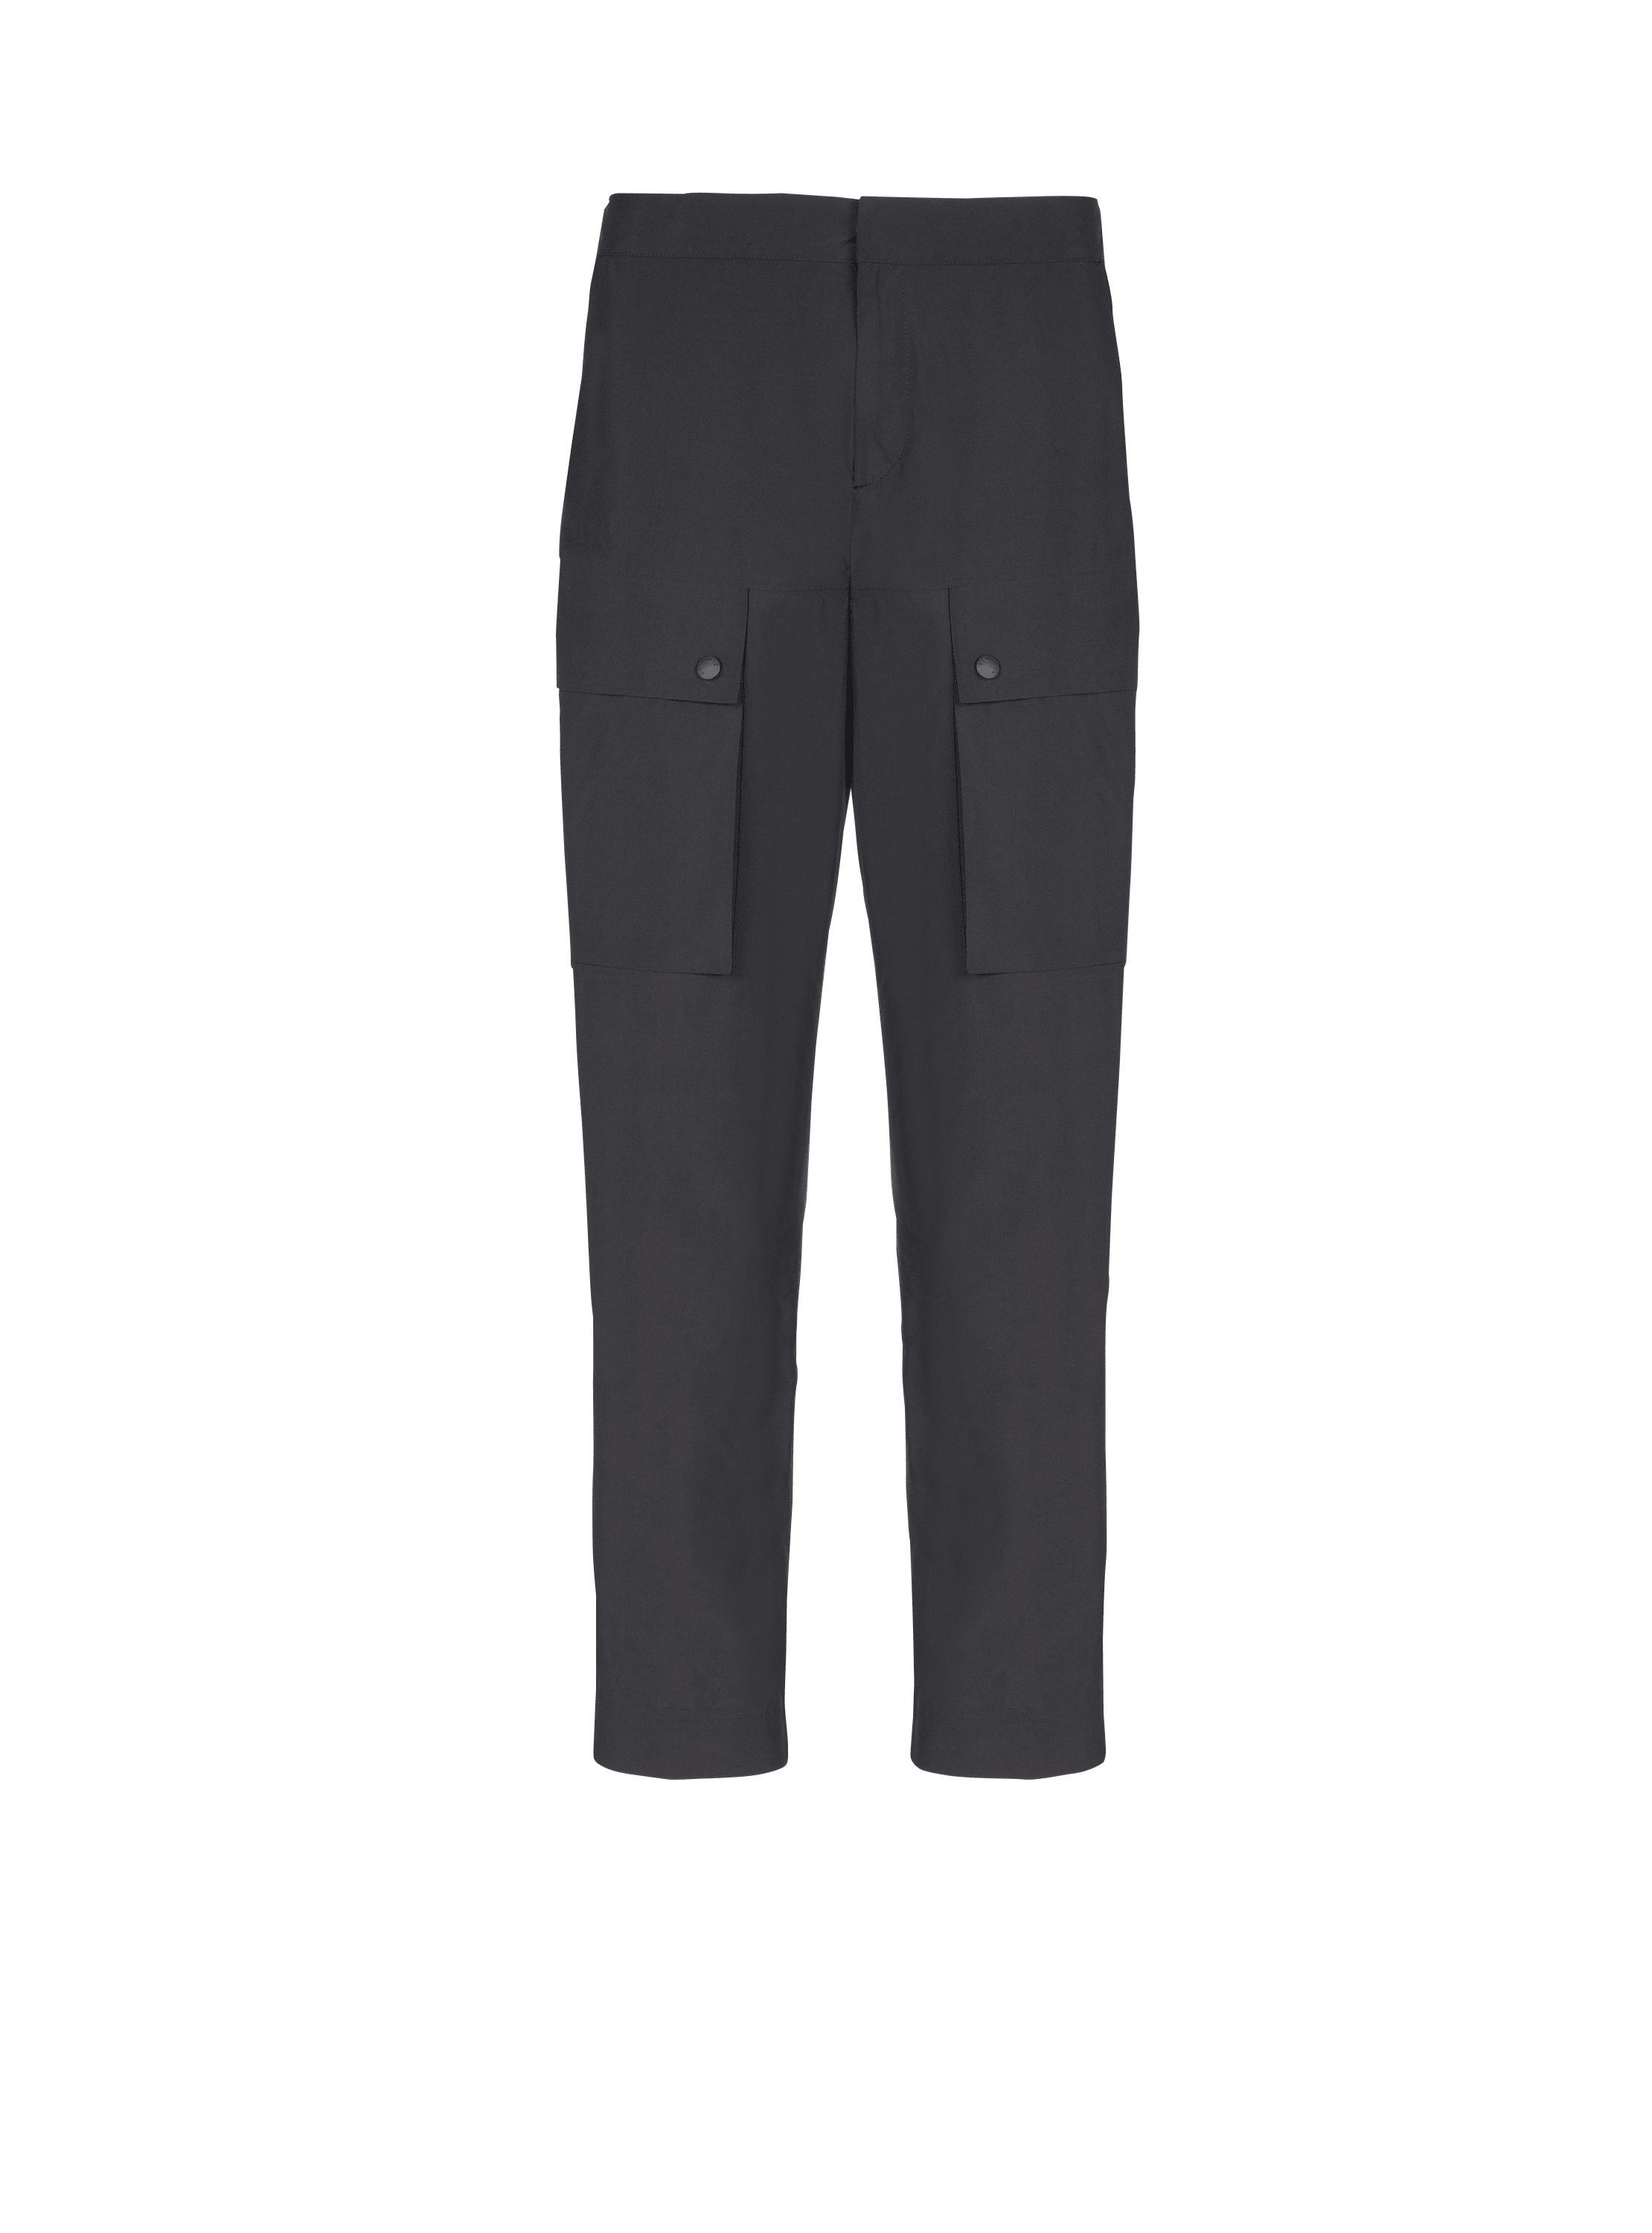 Main Lab cargo trousers